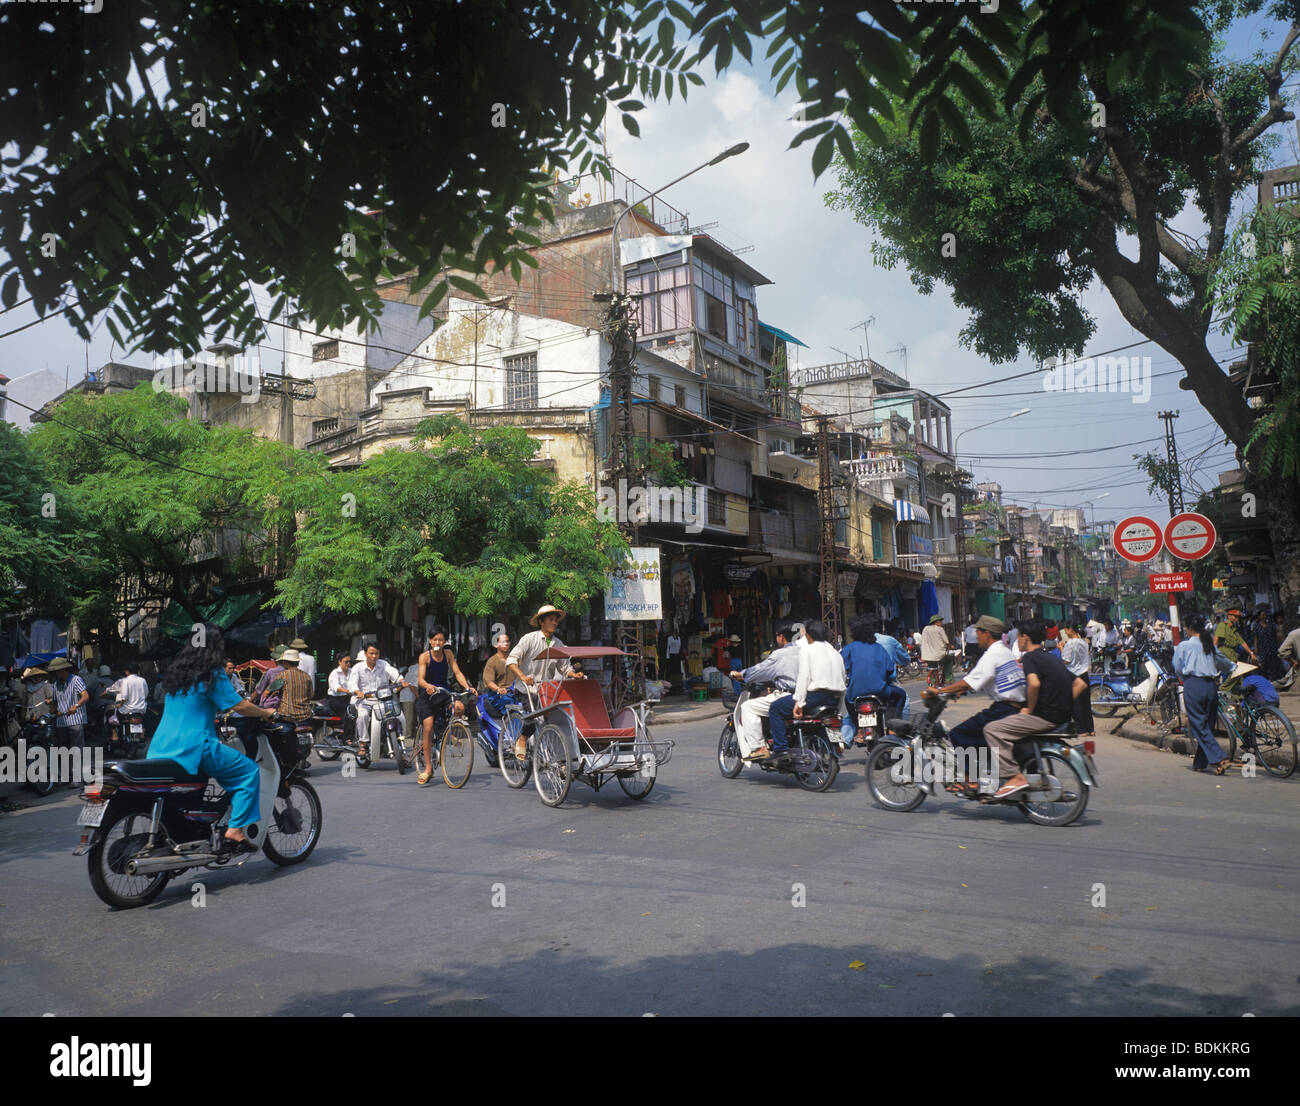 Vietnam, Hanoi, The Old Quarter, busy intersection at Hang Dao Street Stock Photo